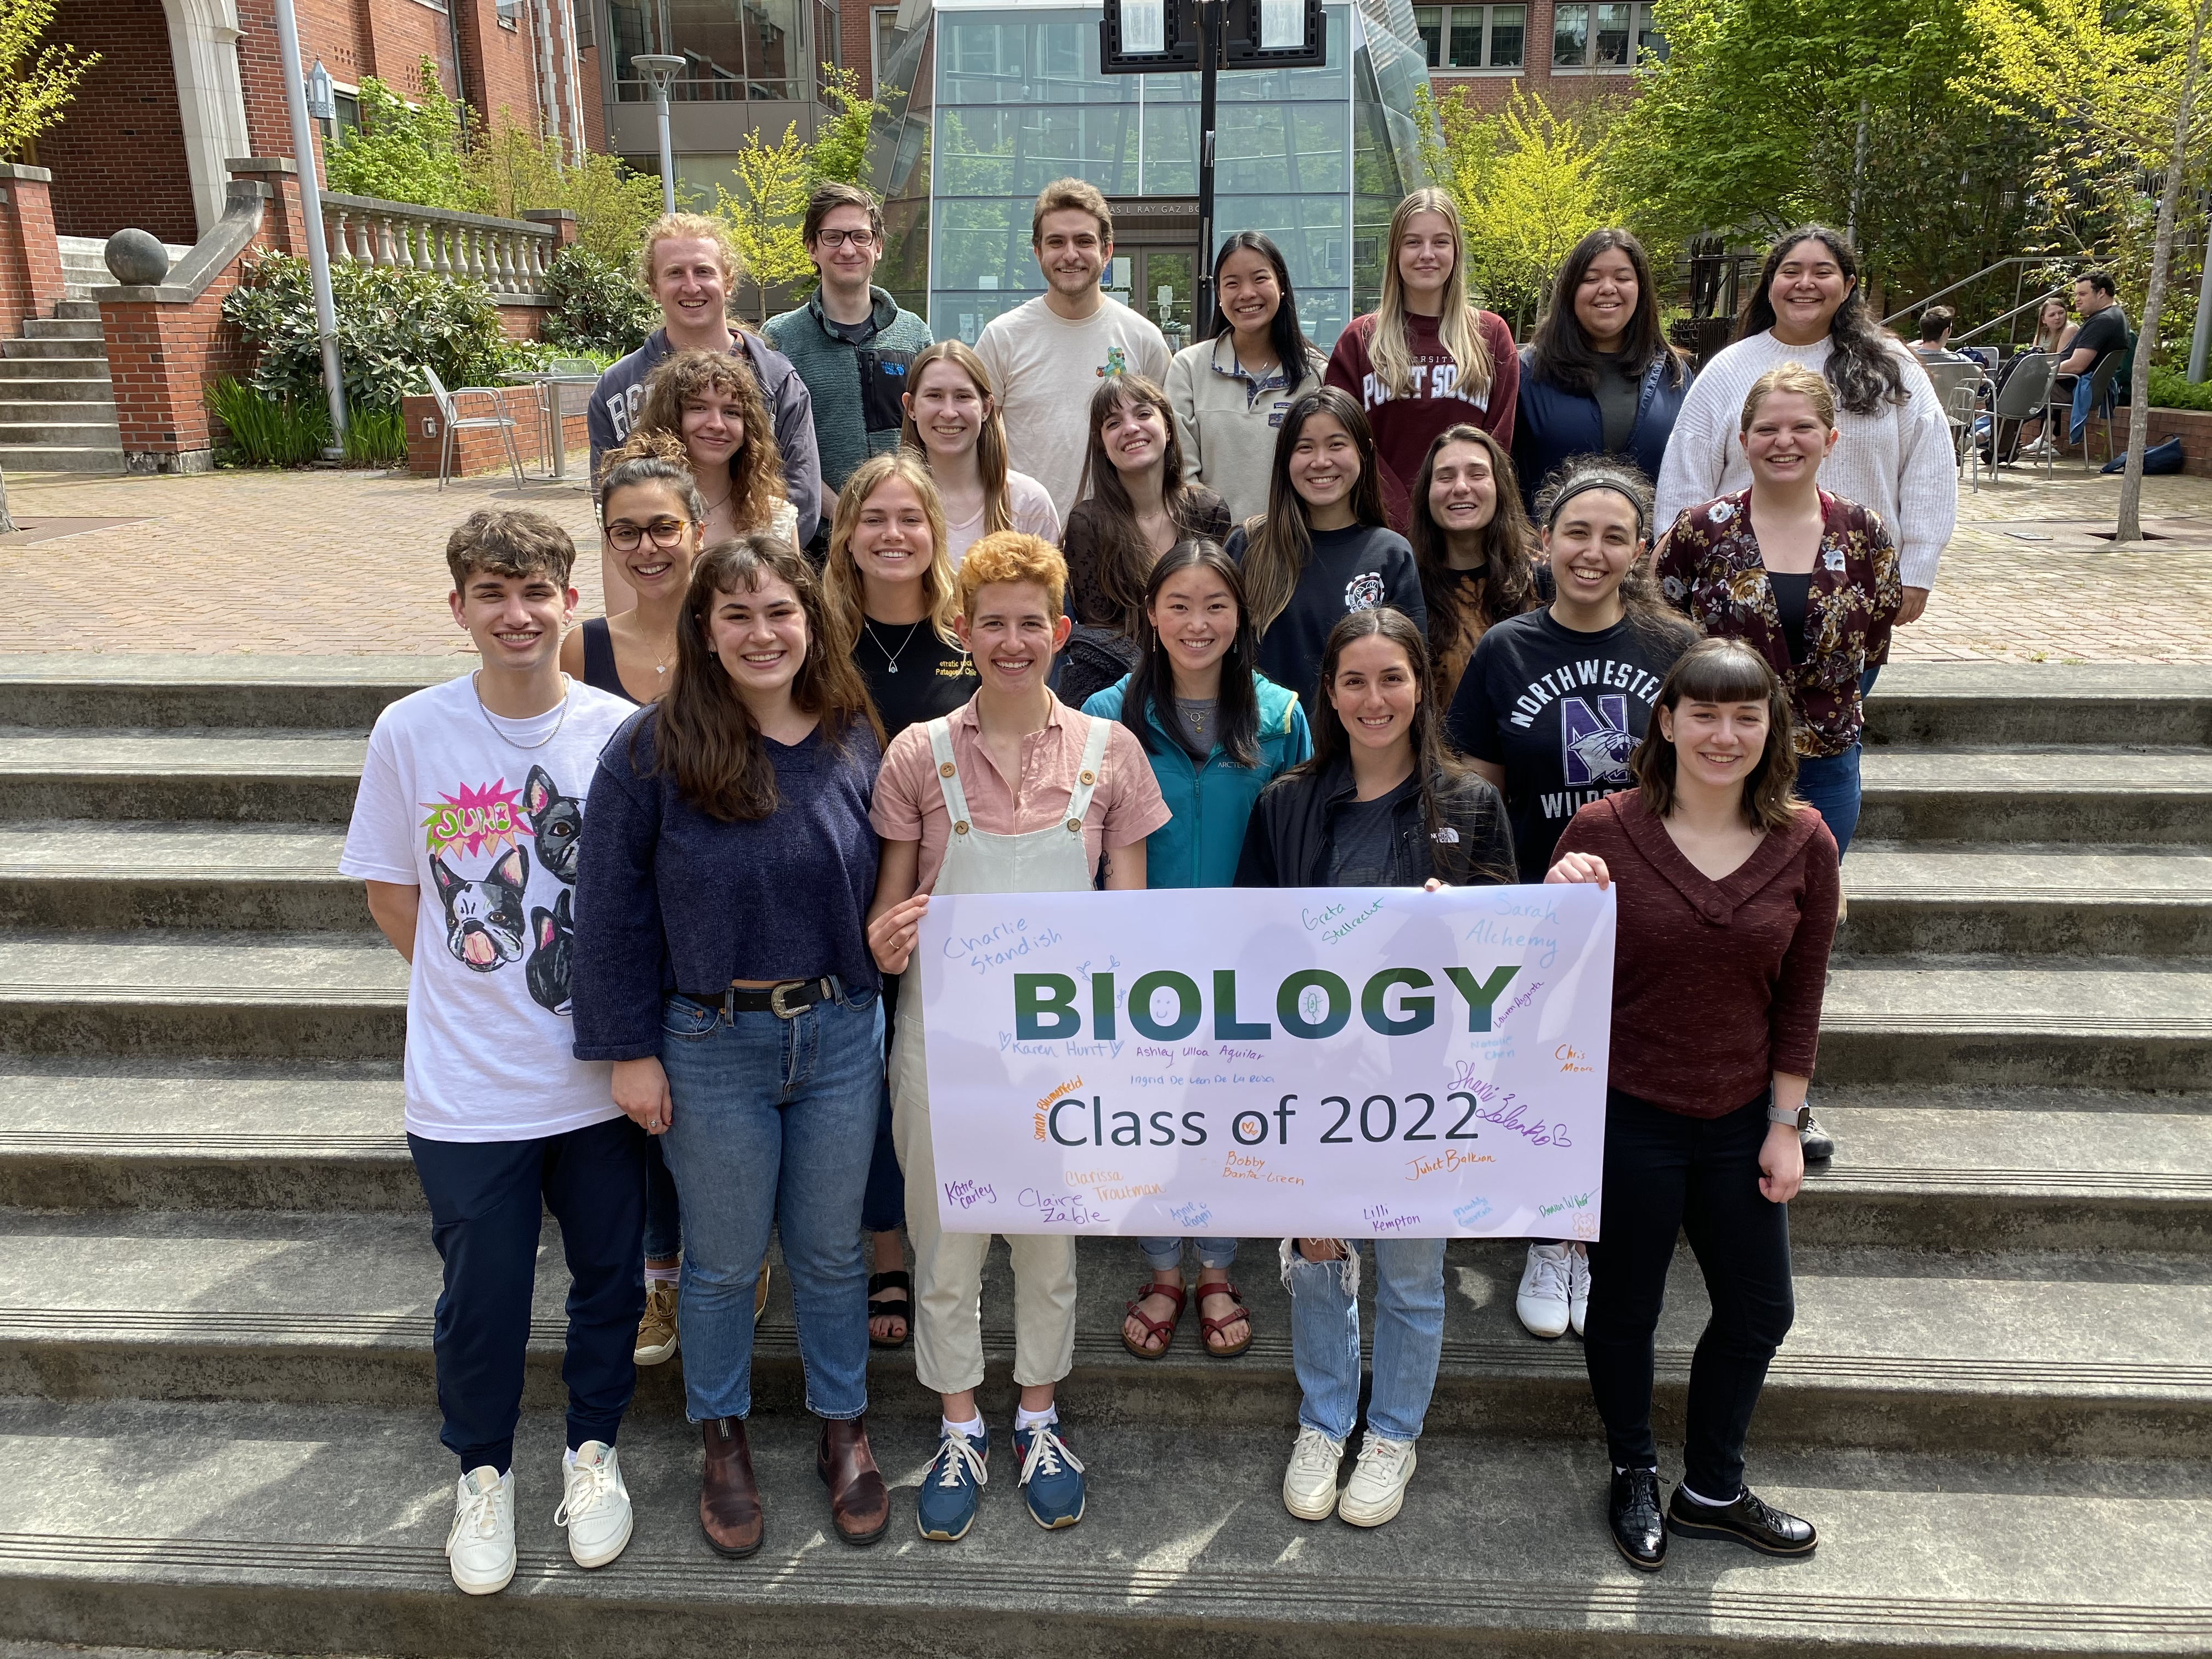 Biology students gathered for group photo holding Class of 2022 sign